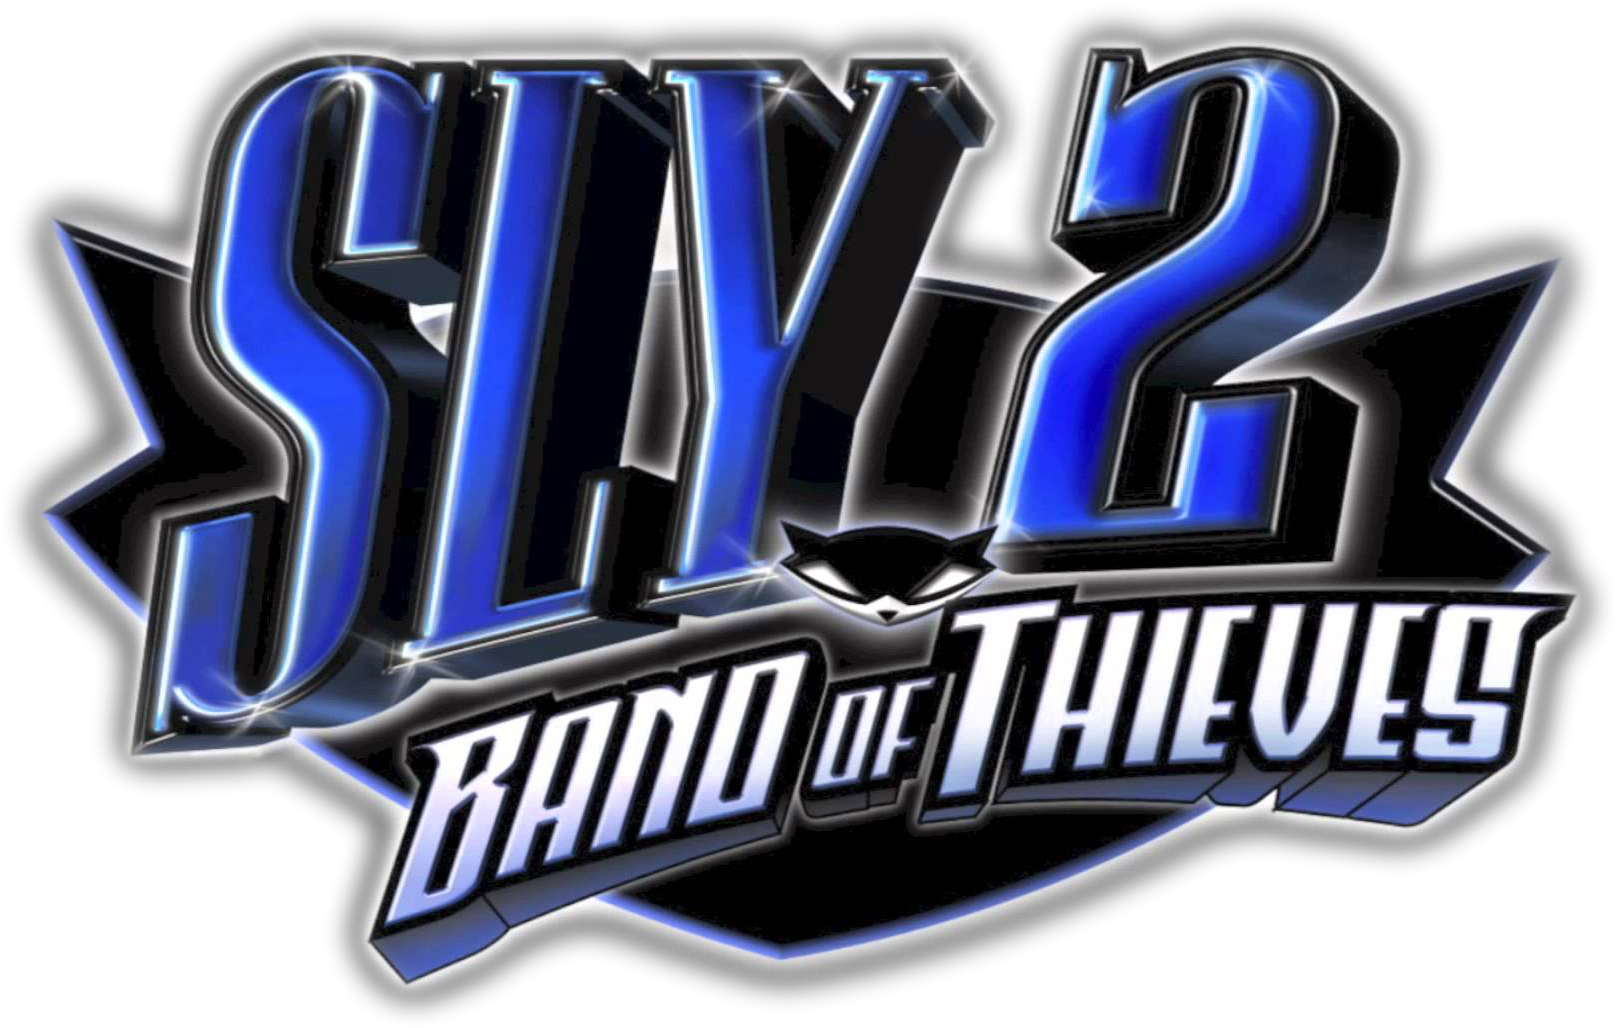 Download Band Of Thieves Sly 2 Band Of Thieves Playstation 2 Ps2 Png Image With No Background Pngkey Com